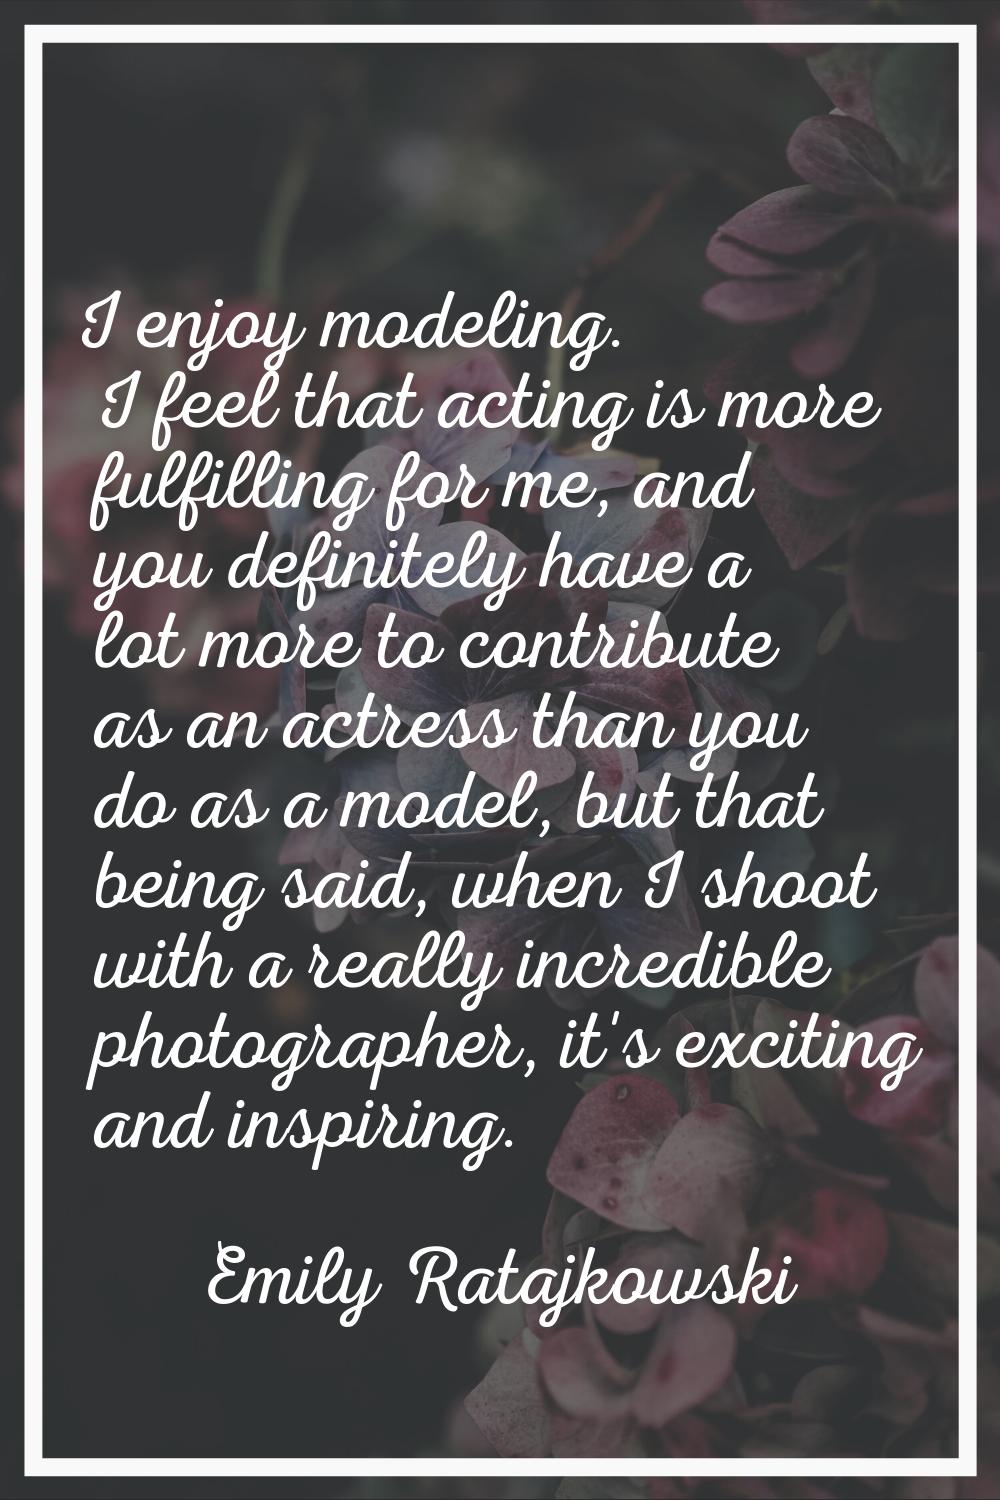 I enjoy modeling. I feel that acting is more fulfilling for me, and you definitely have a lot more 